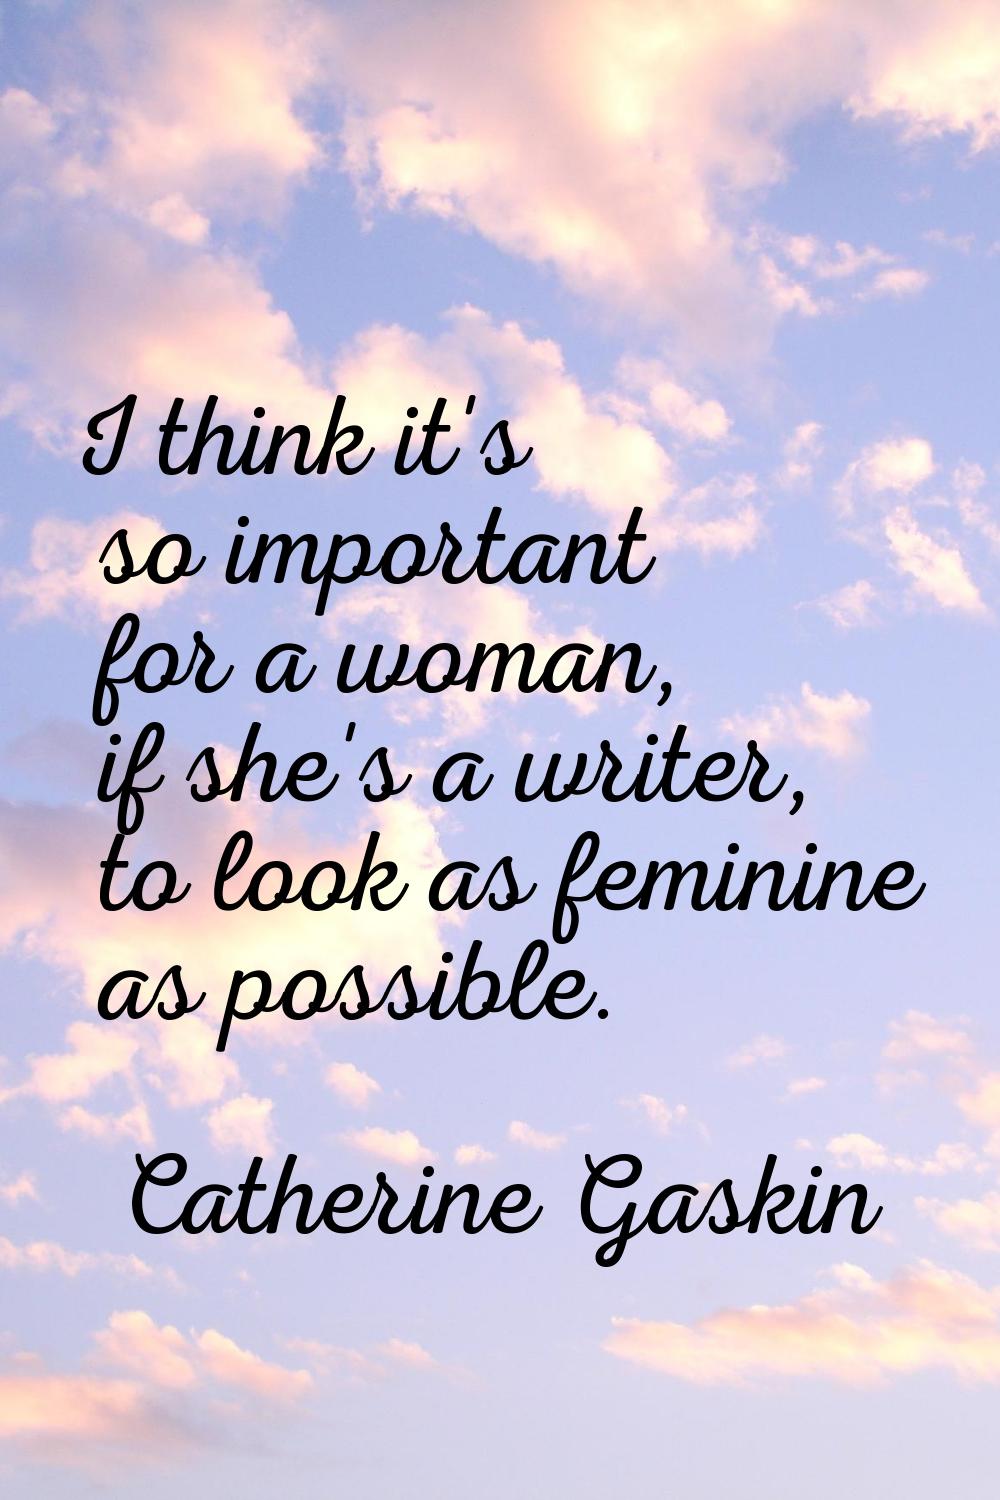 I think it's so important for a woman, if she's a writer, to look as feminine as possible.